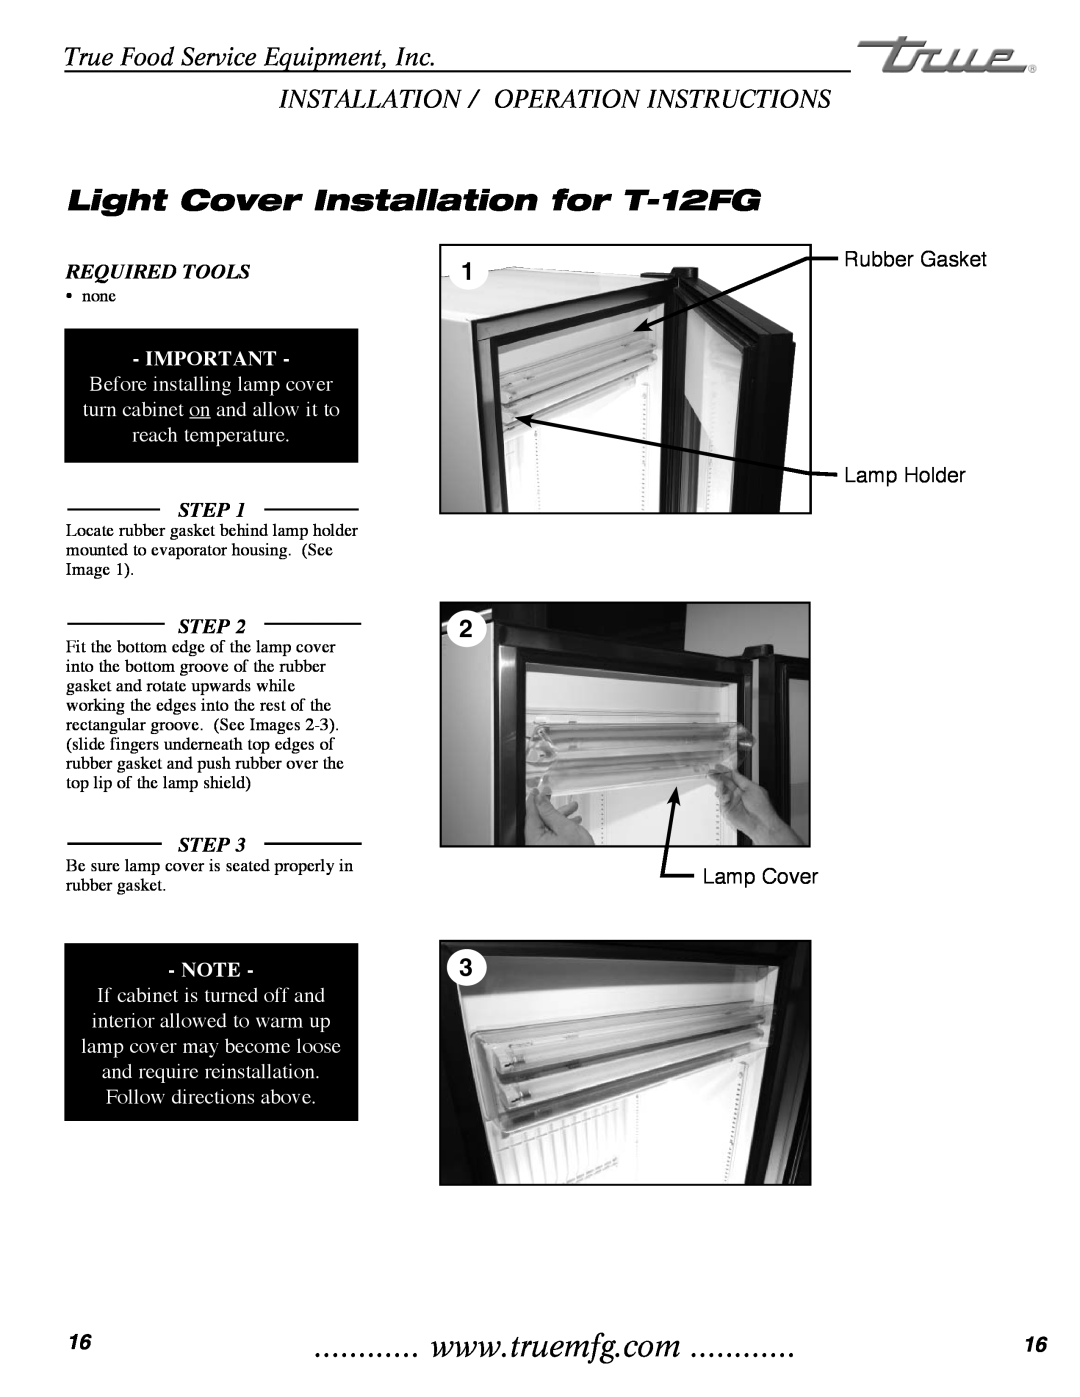 True Manufacturing Company T-35 Light Cover Installation for T-12FG, True Food Service Equipment, Inc, Required Tools 